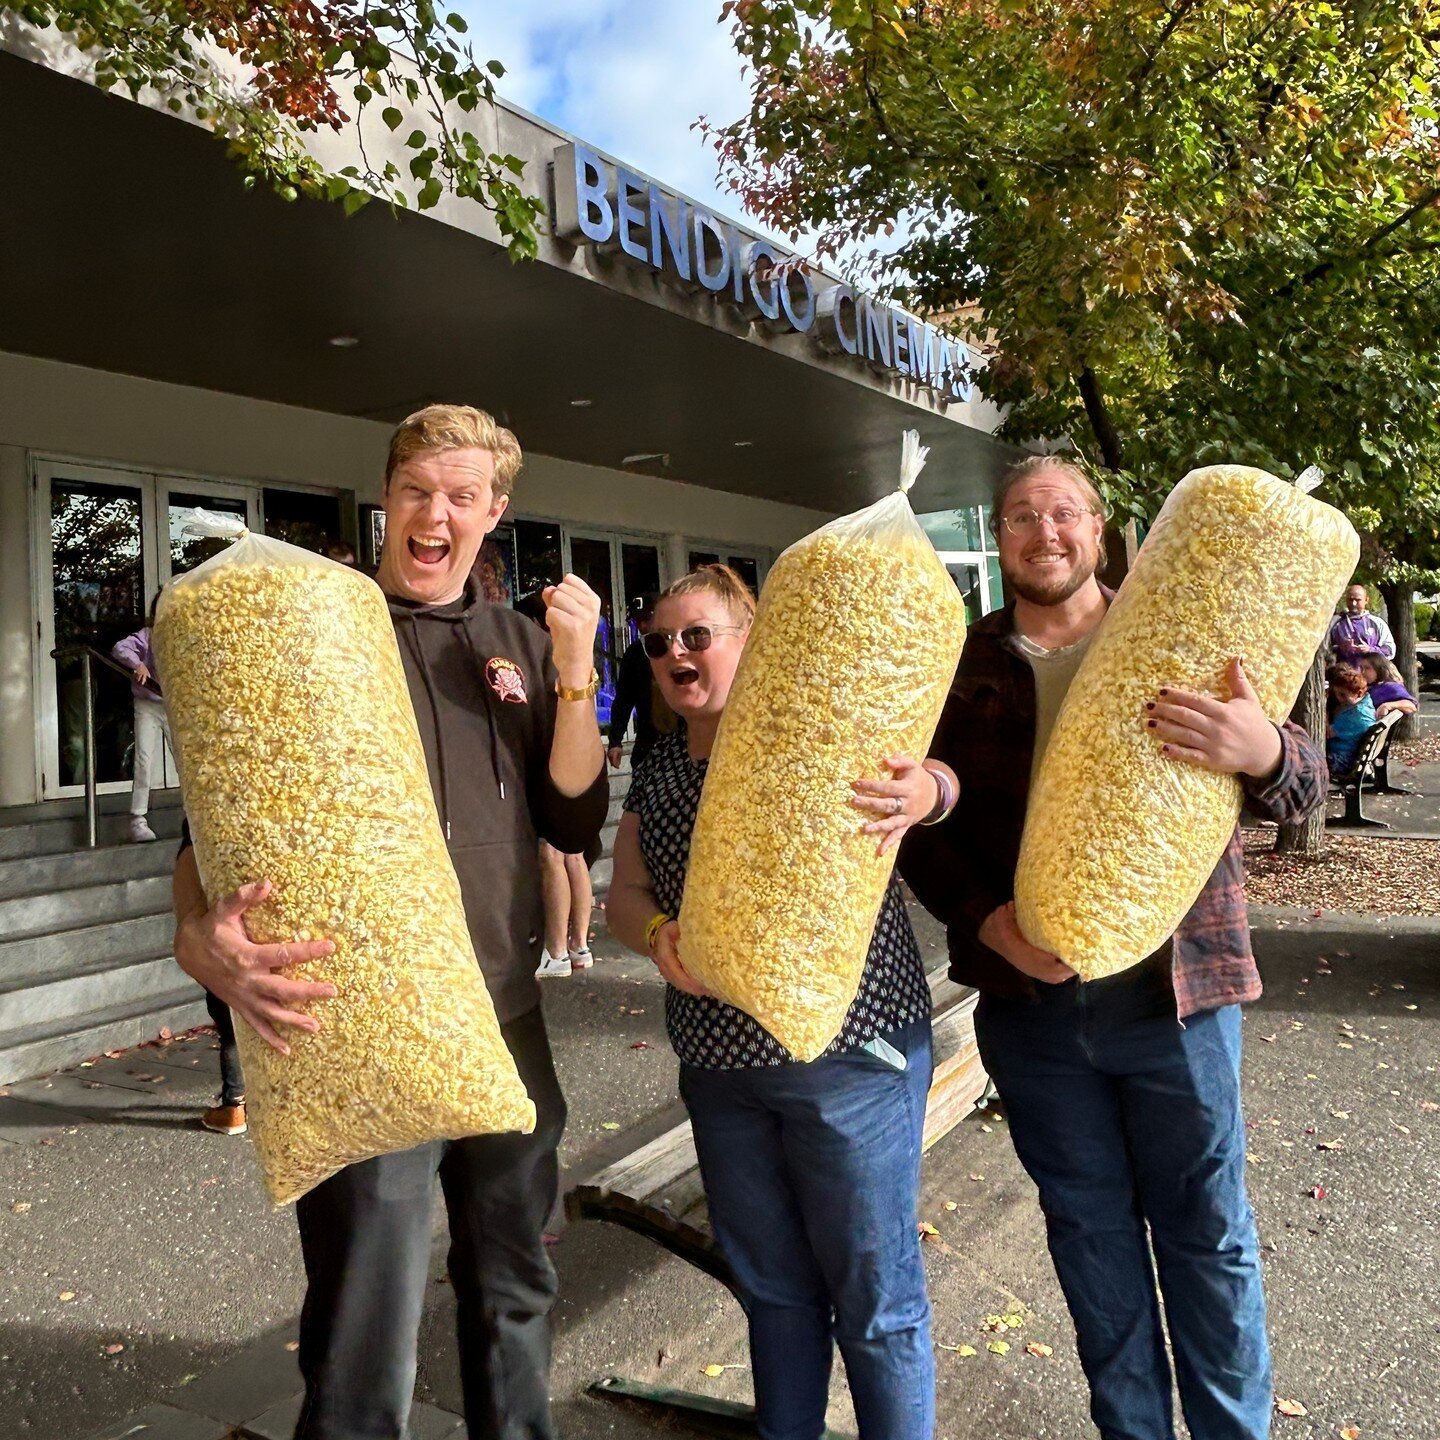 Massive thanks to our mates at @bendigocinemas for providing a supremely ridiculous amount of popcorn for our show! We had a blast hurtling it at Mini Beanies 😅🍿⁠
⁠
There are still a few chances to check out the madness in Box Hill and Dubbo, ticke